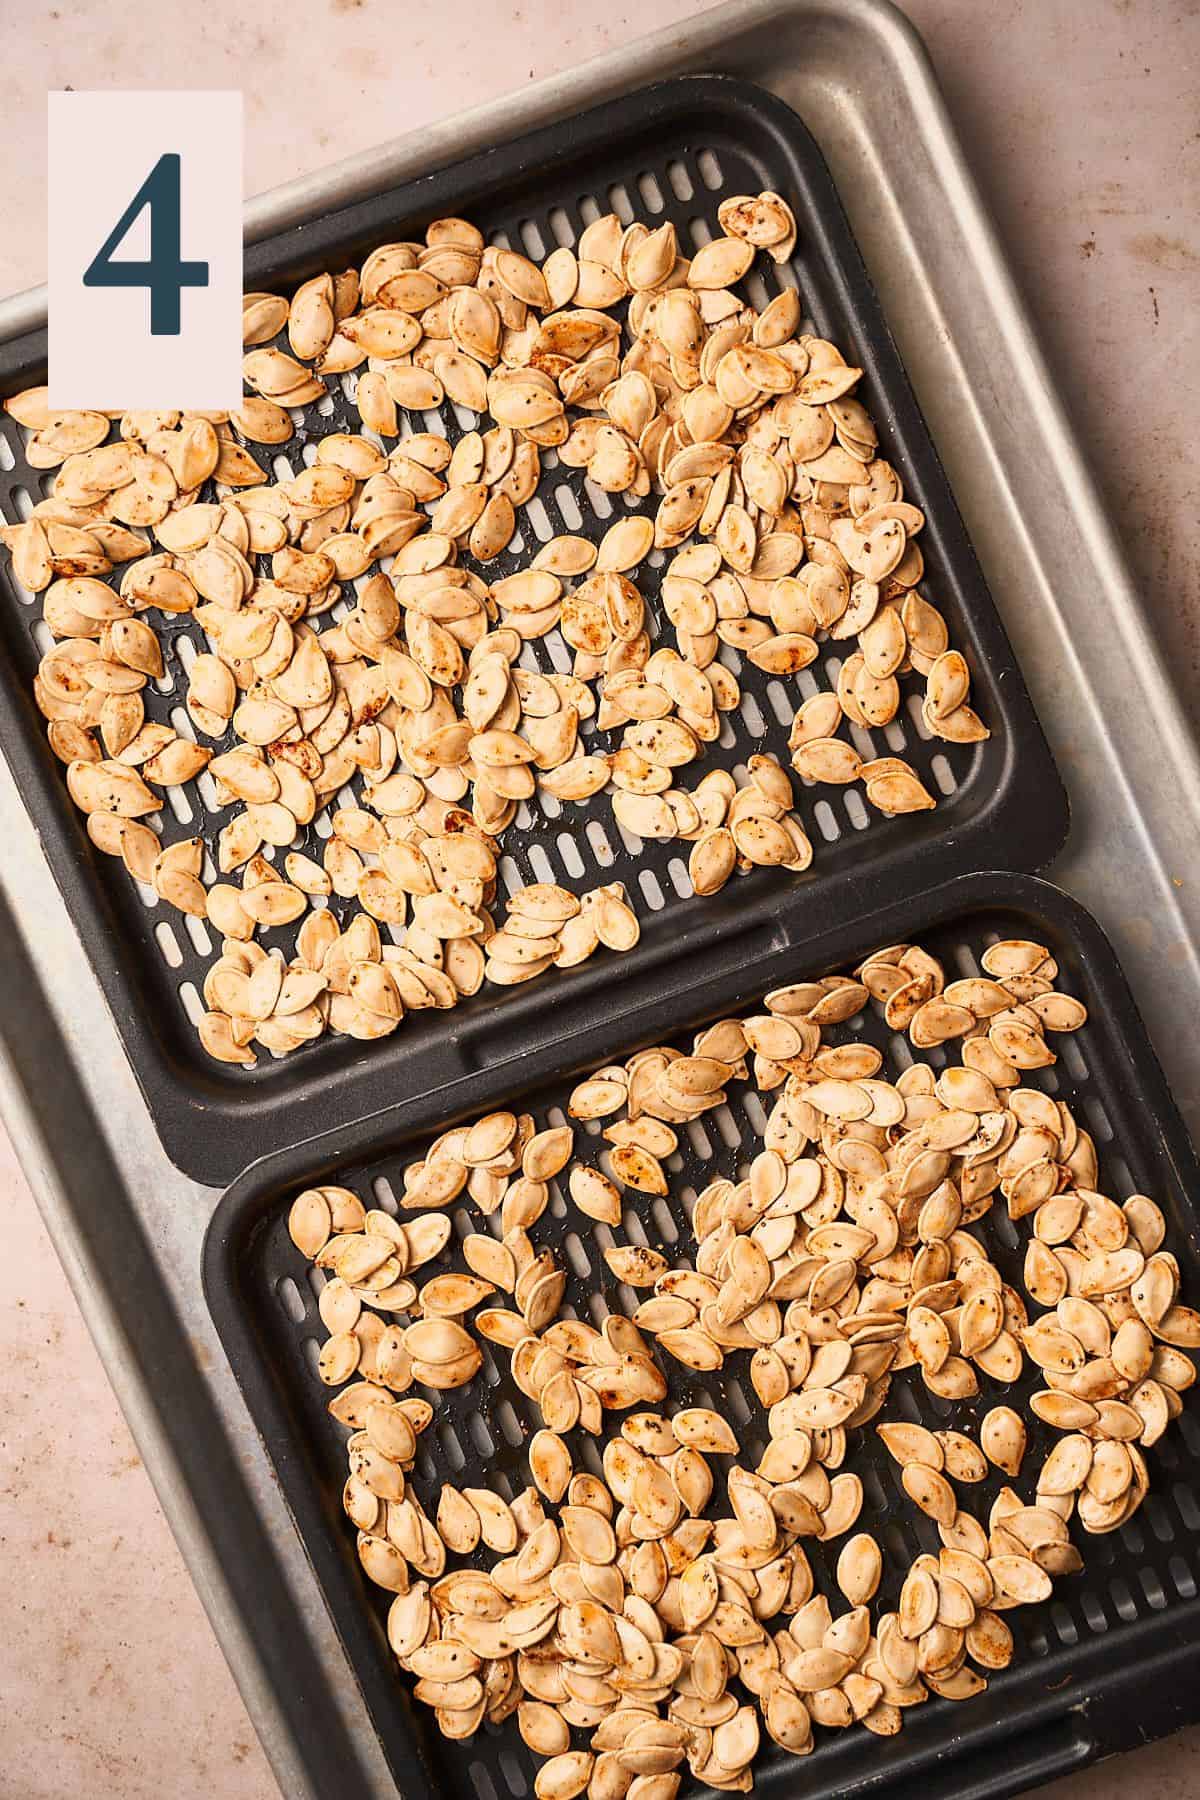 Seeds placed on air fryer tray to roast and become flavorful.